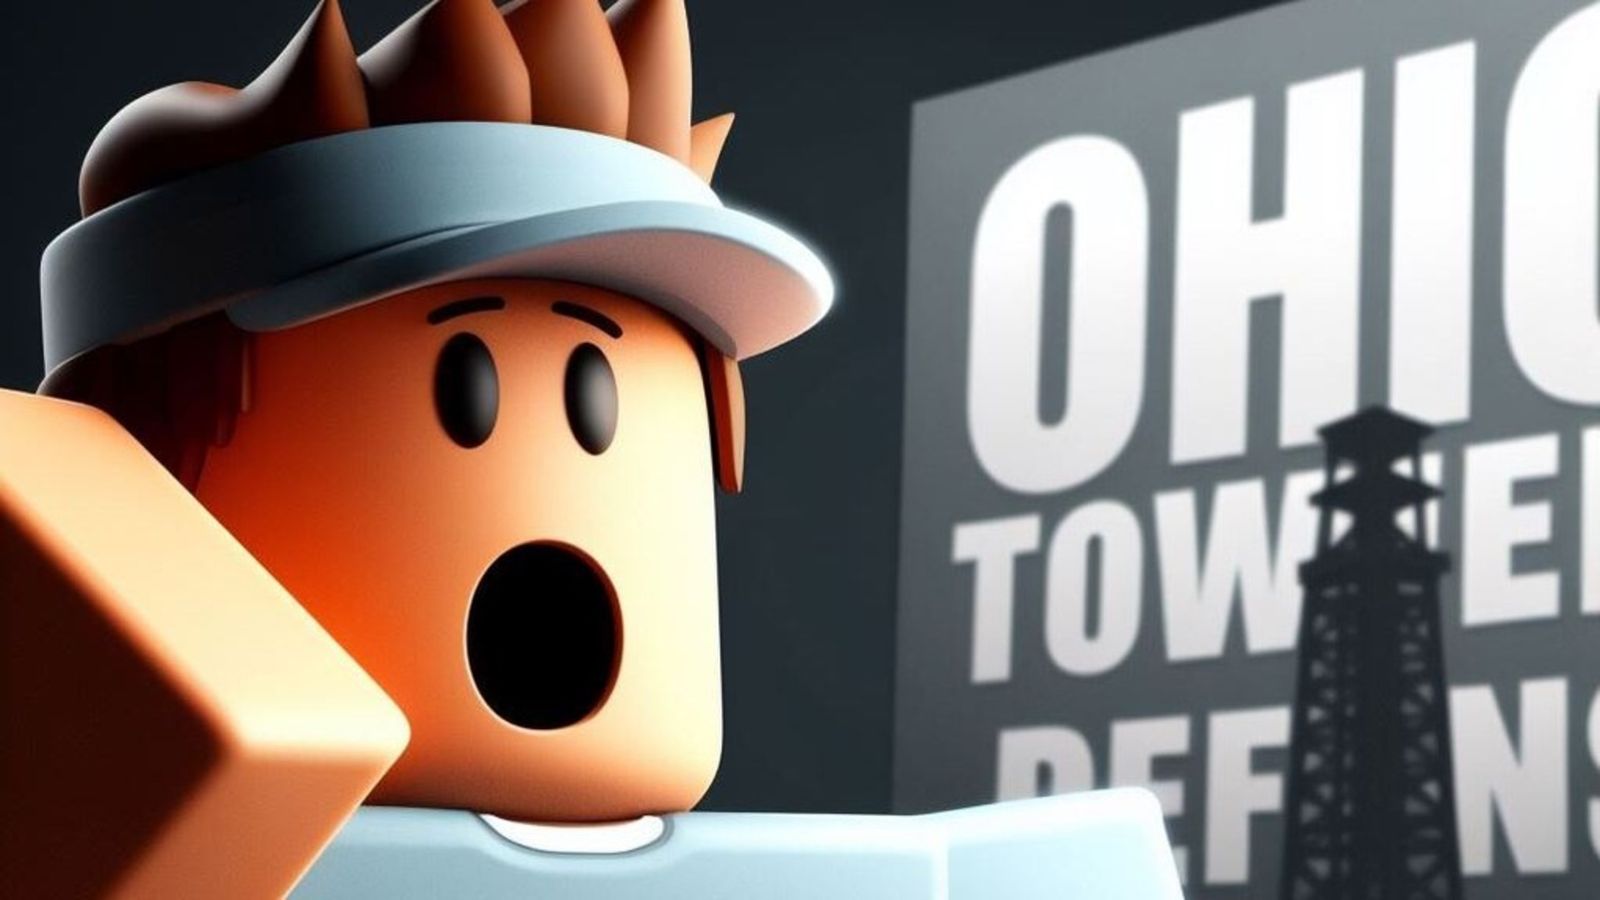 A Roblox character surprised next to a billboard labelled Ohio Tower Defense.